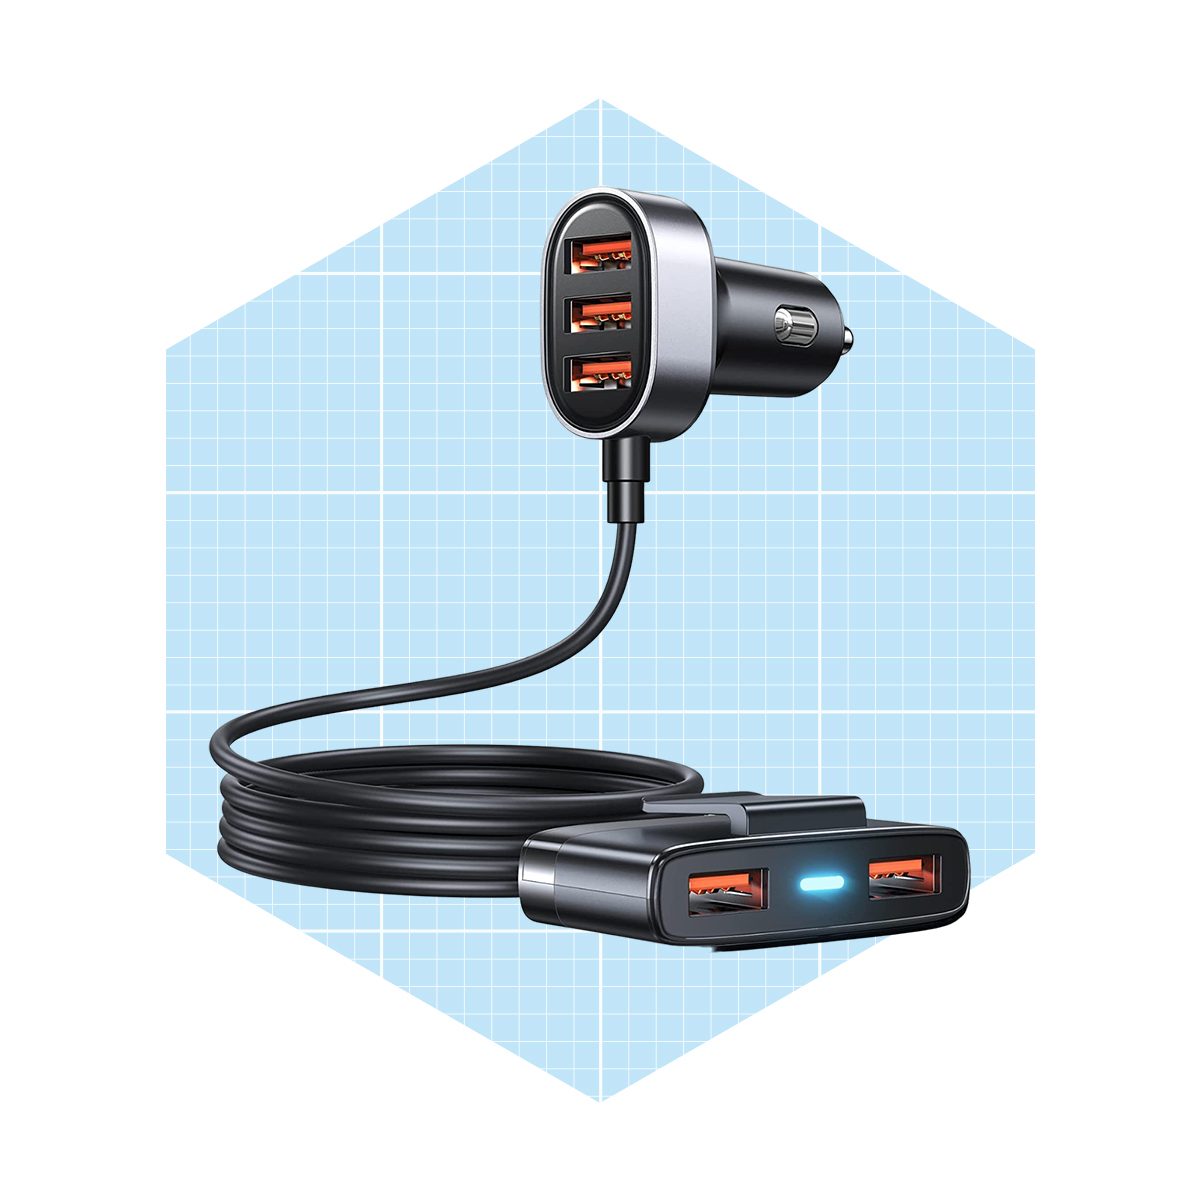 <p>A USB car charger adapter with multiple ports is a must-have accessory for any road trip. Compatible with a wide variety of devices, this <a href="https://www.amazon.com/Charger-Adapter-Compatible-Tablets-Devices/dp/B08JTWPLC4" rel="noopener noreferrer">multiport car charger</a> keeps your smartphones, tablets, GPS and other USB-powered devices running. Plug it into the car's 12V port and it's ready to go. There are three USB ports for the front seats and a long double-port extension for passengers in the back.</p> <p class="listicle-page__cta-button-shop"><a class="shop-btn" href="https://www.amazon.com/Charger-Adapter-Compatible-Tablets-Devices/dp/B08JTWPLC4">Shop Now</a></p>